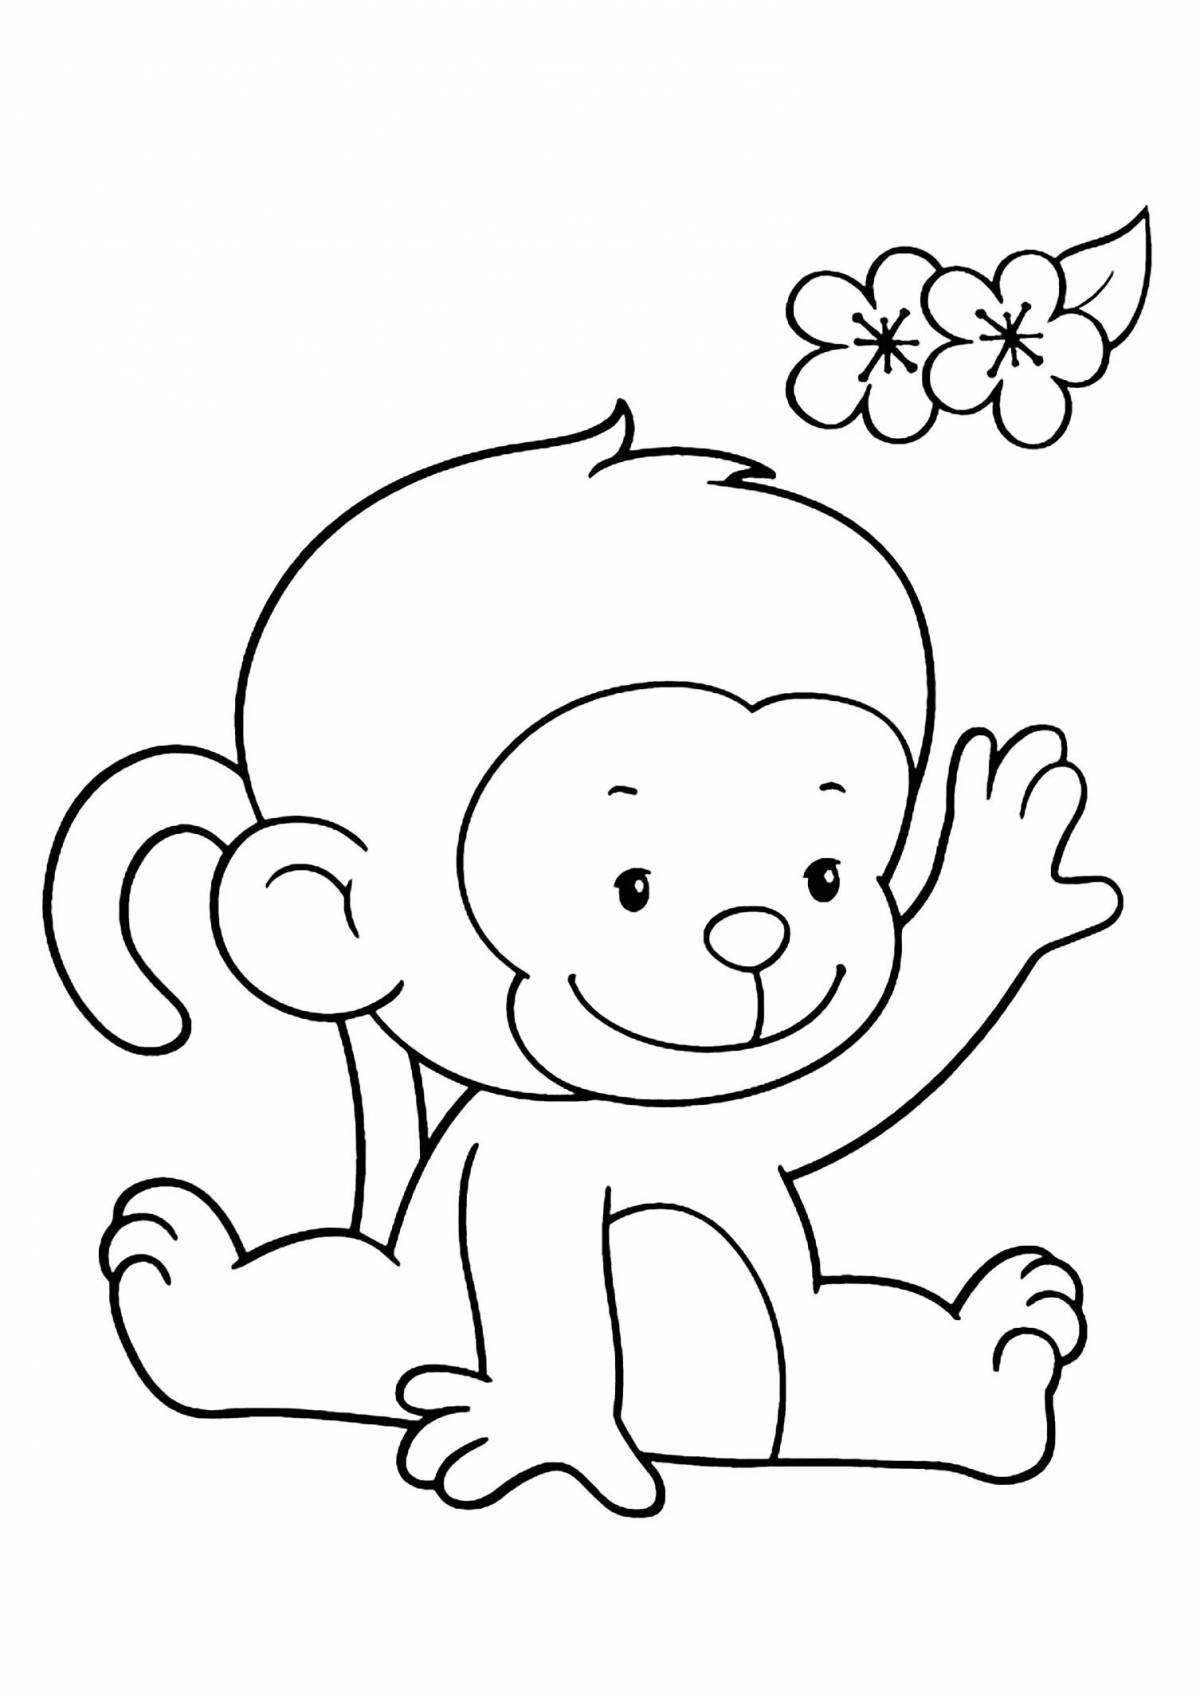 Playful chimpanzee coloring page for kids